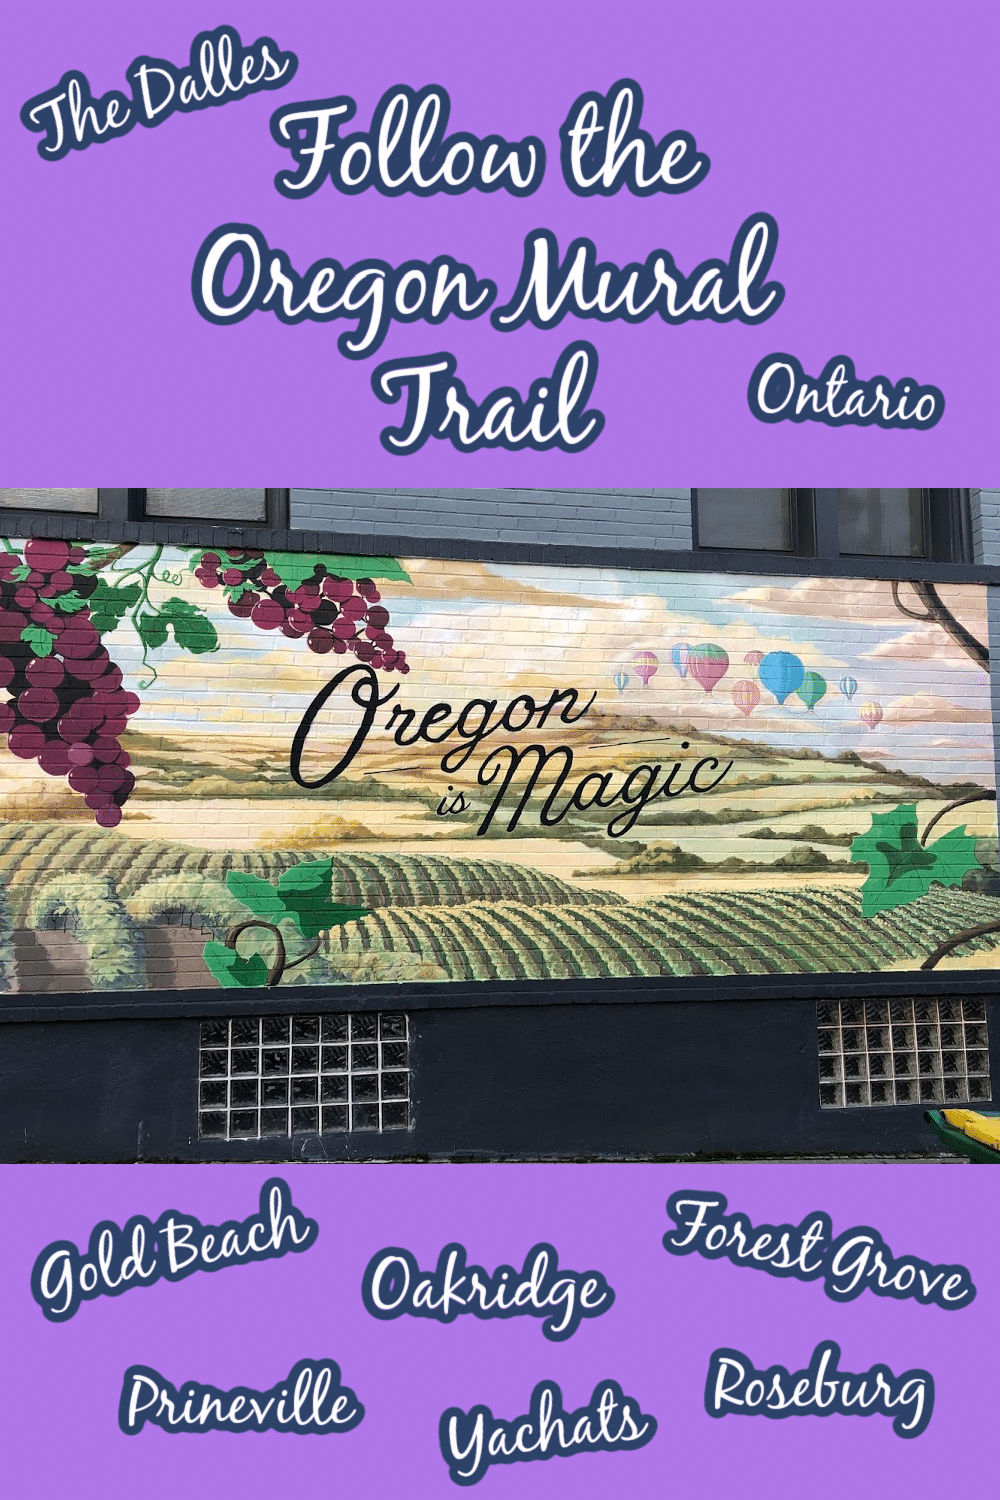 Follow the Oregon Mural Trail with Oregon is Magic Forest Grove vineyard mural